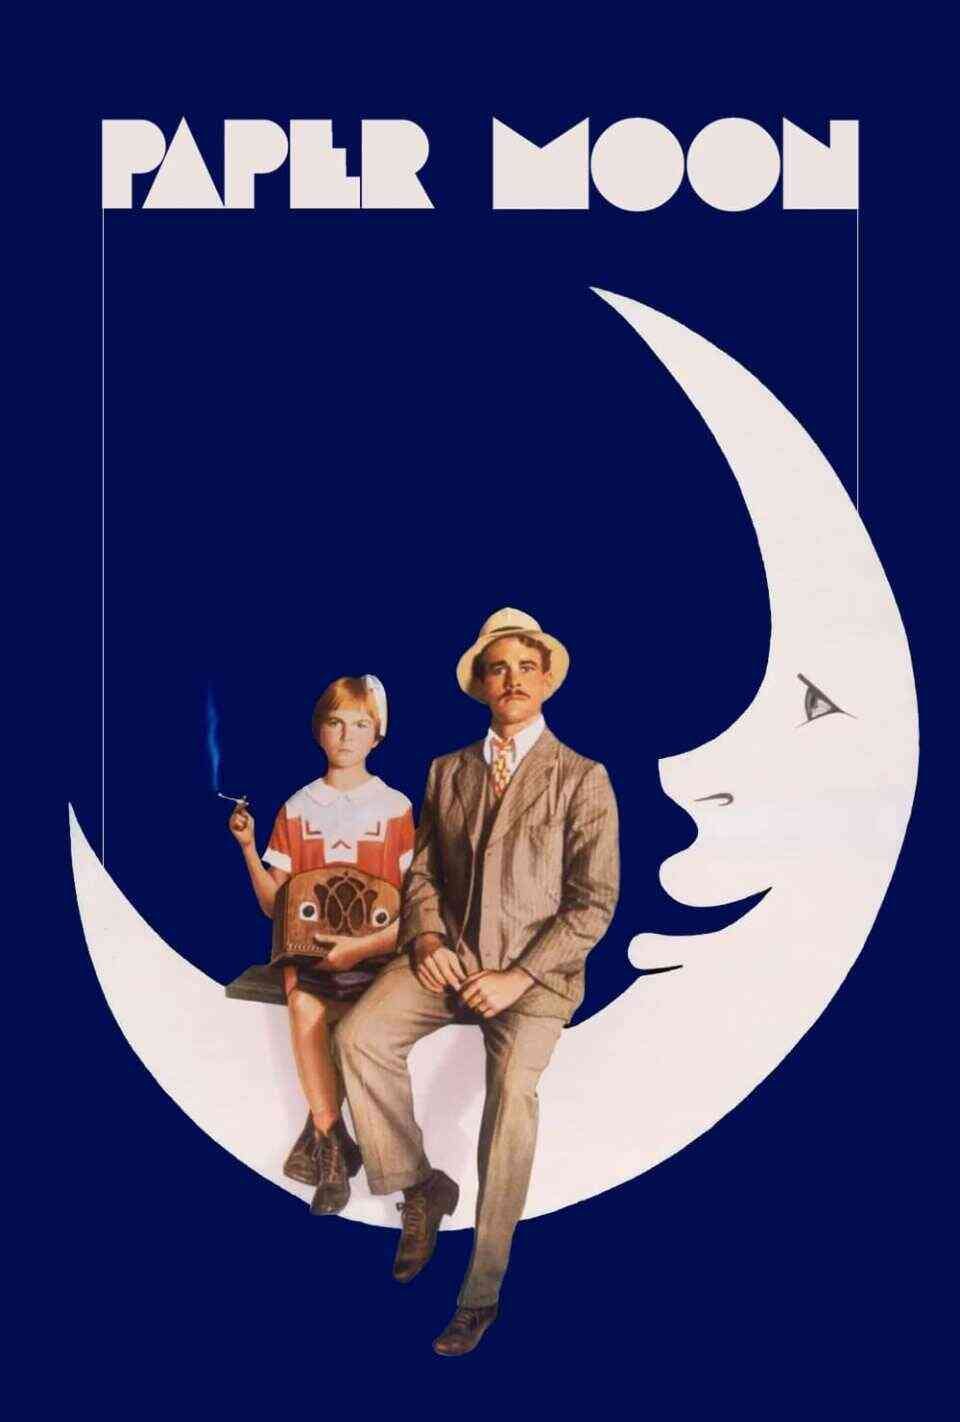 Read Paper Moon screenplay (poster)